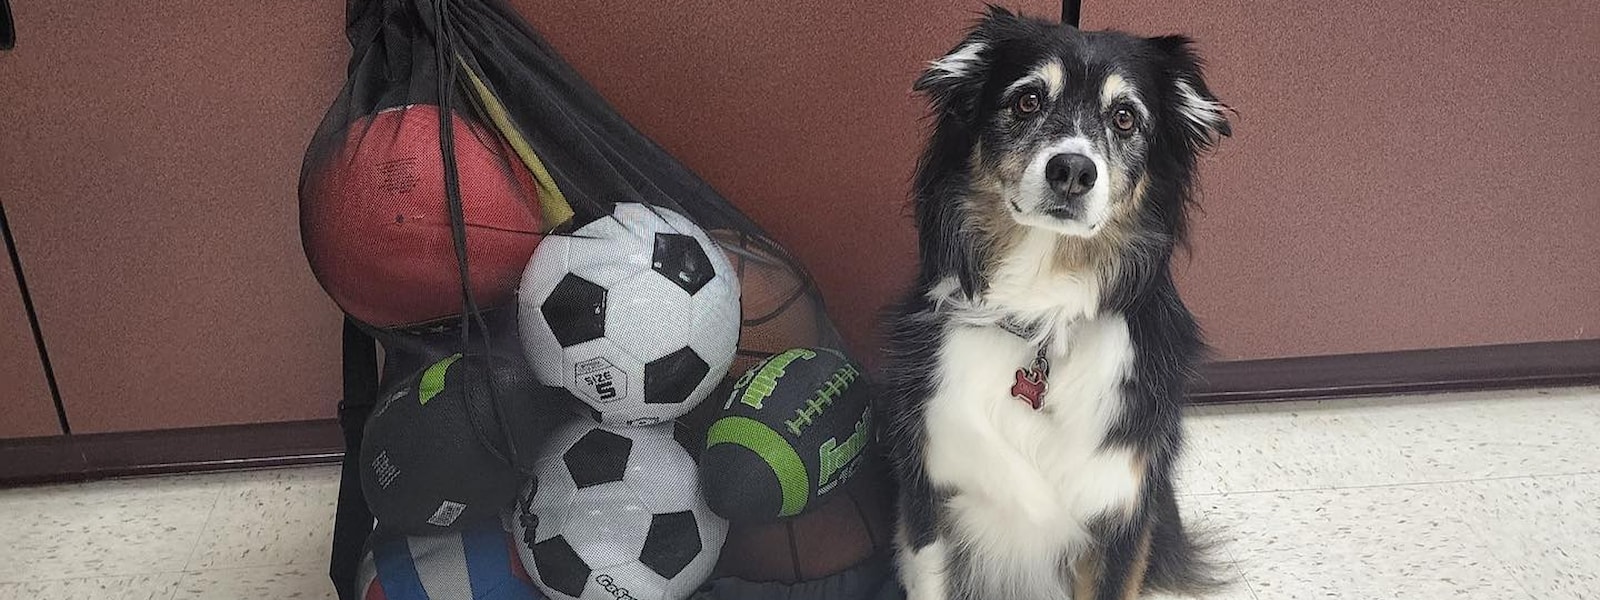 Onyx, the therapy dog sitting by a bag of soccer balls.